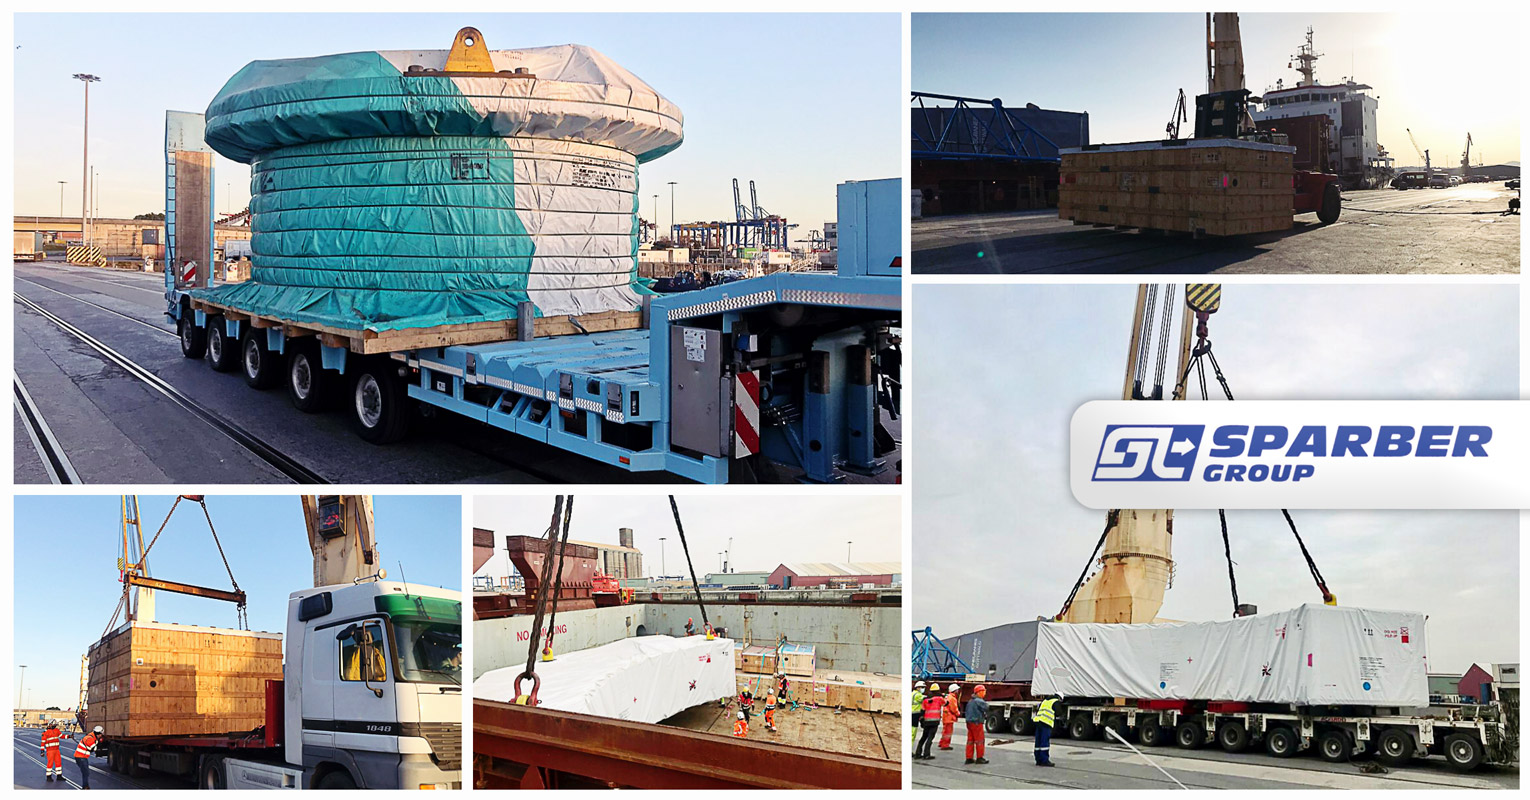 Sparber Group's Bilbao Project Cargo Team Coordinated a Breakbulk Shipment with Pieces up to 120mt